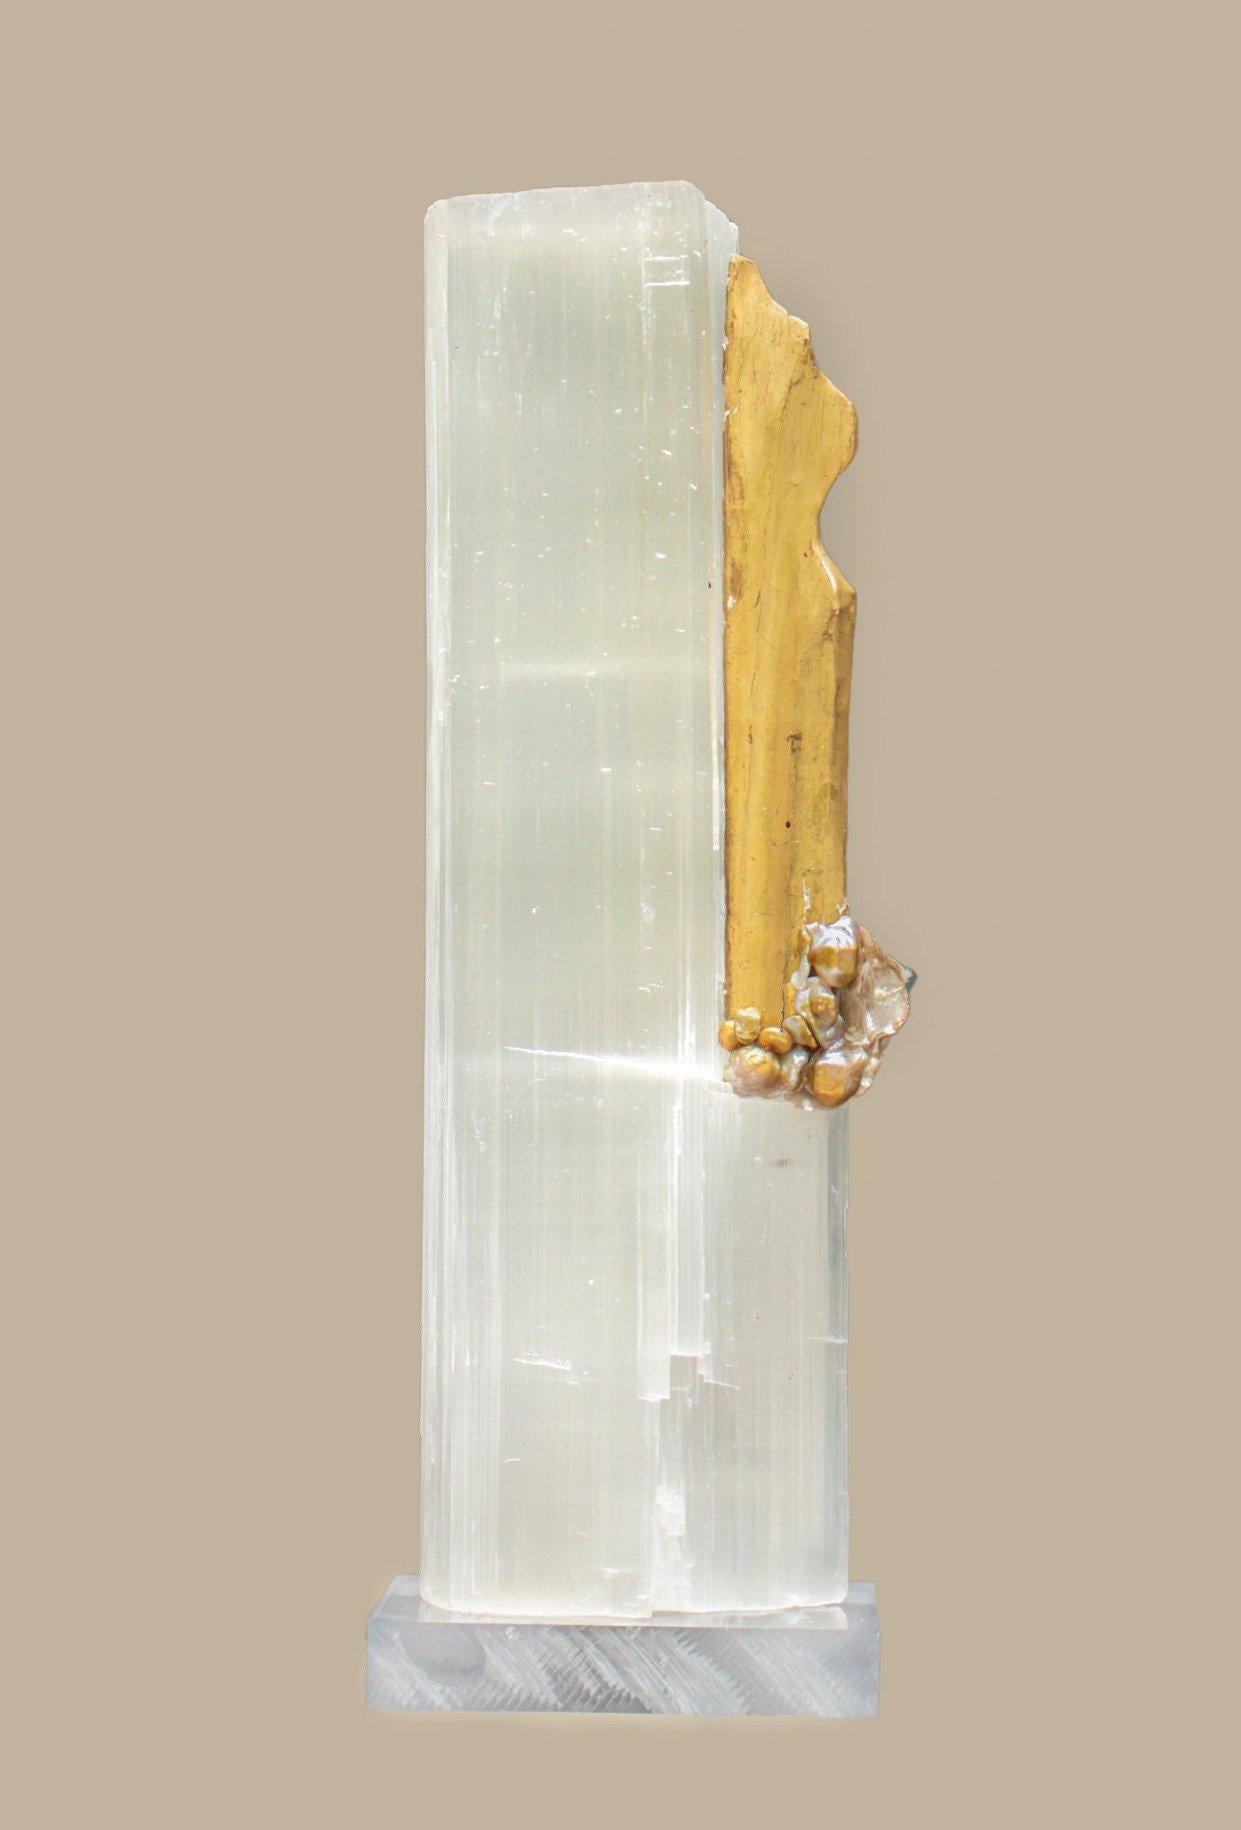 Ruler Selenite with an 18th century Italian gold leaf fragment. Mica, and natural forming baroque pearls on a lucite base. Ruler selenite or 